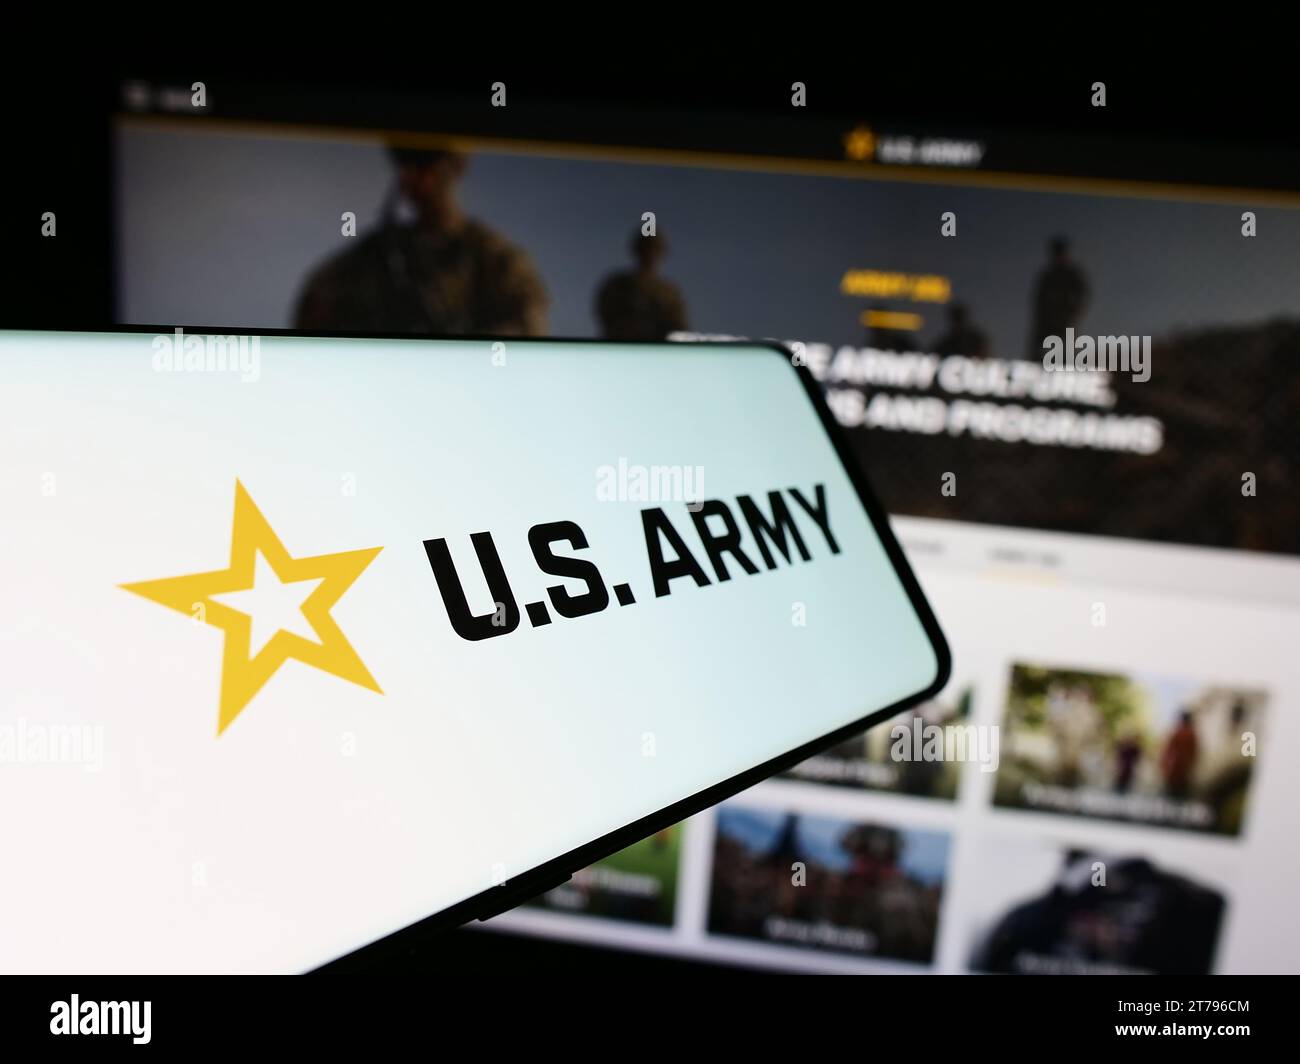 Smartphone with logo of United States Army in front of website. Focus on center-left of phone display. Stock Photo